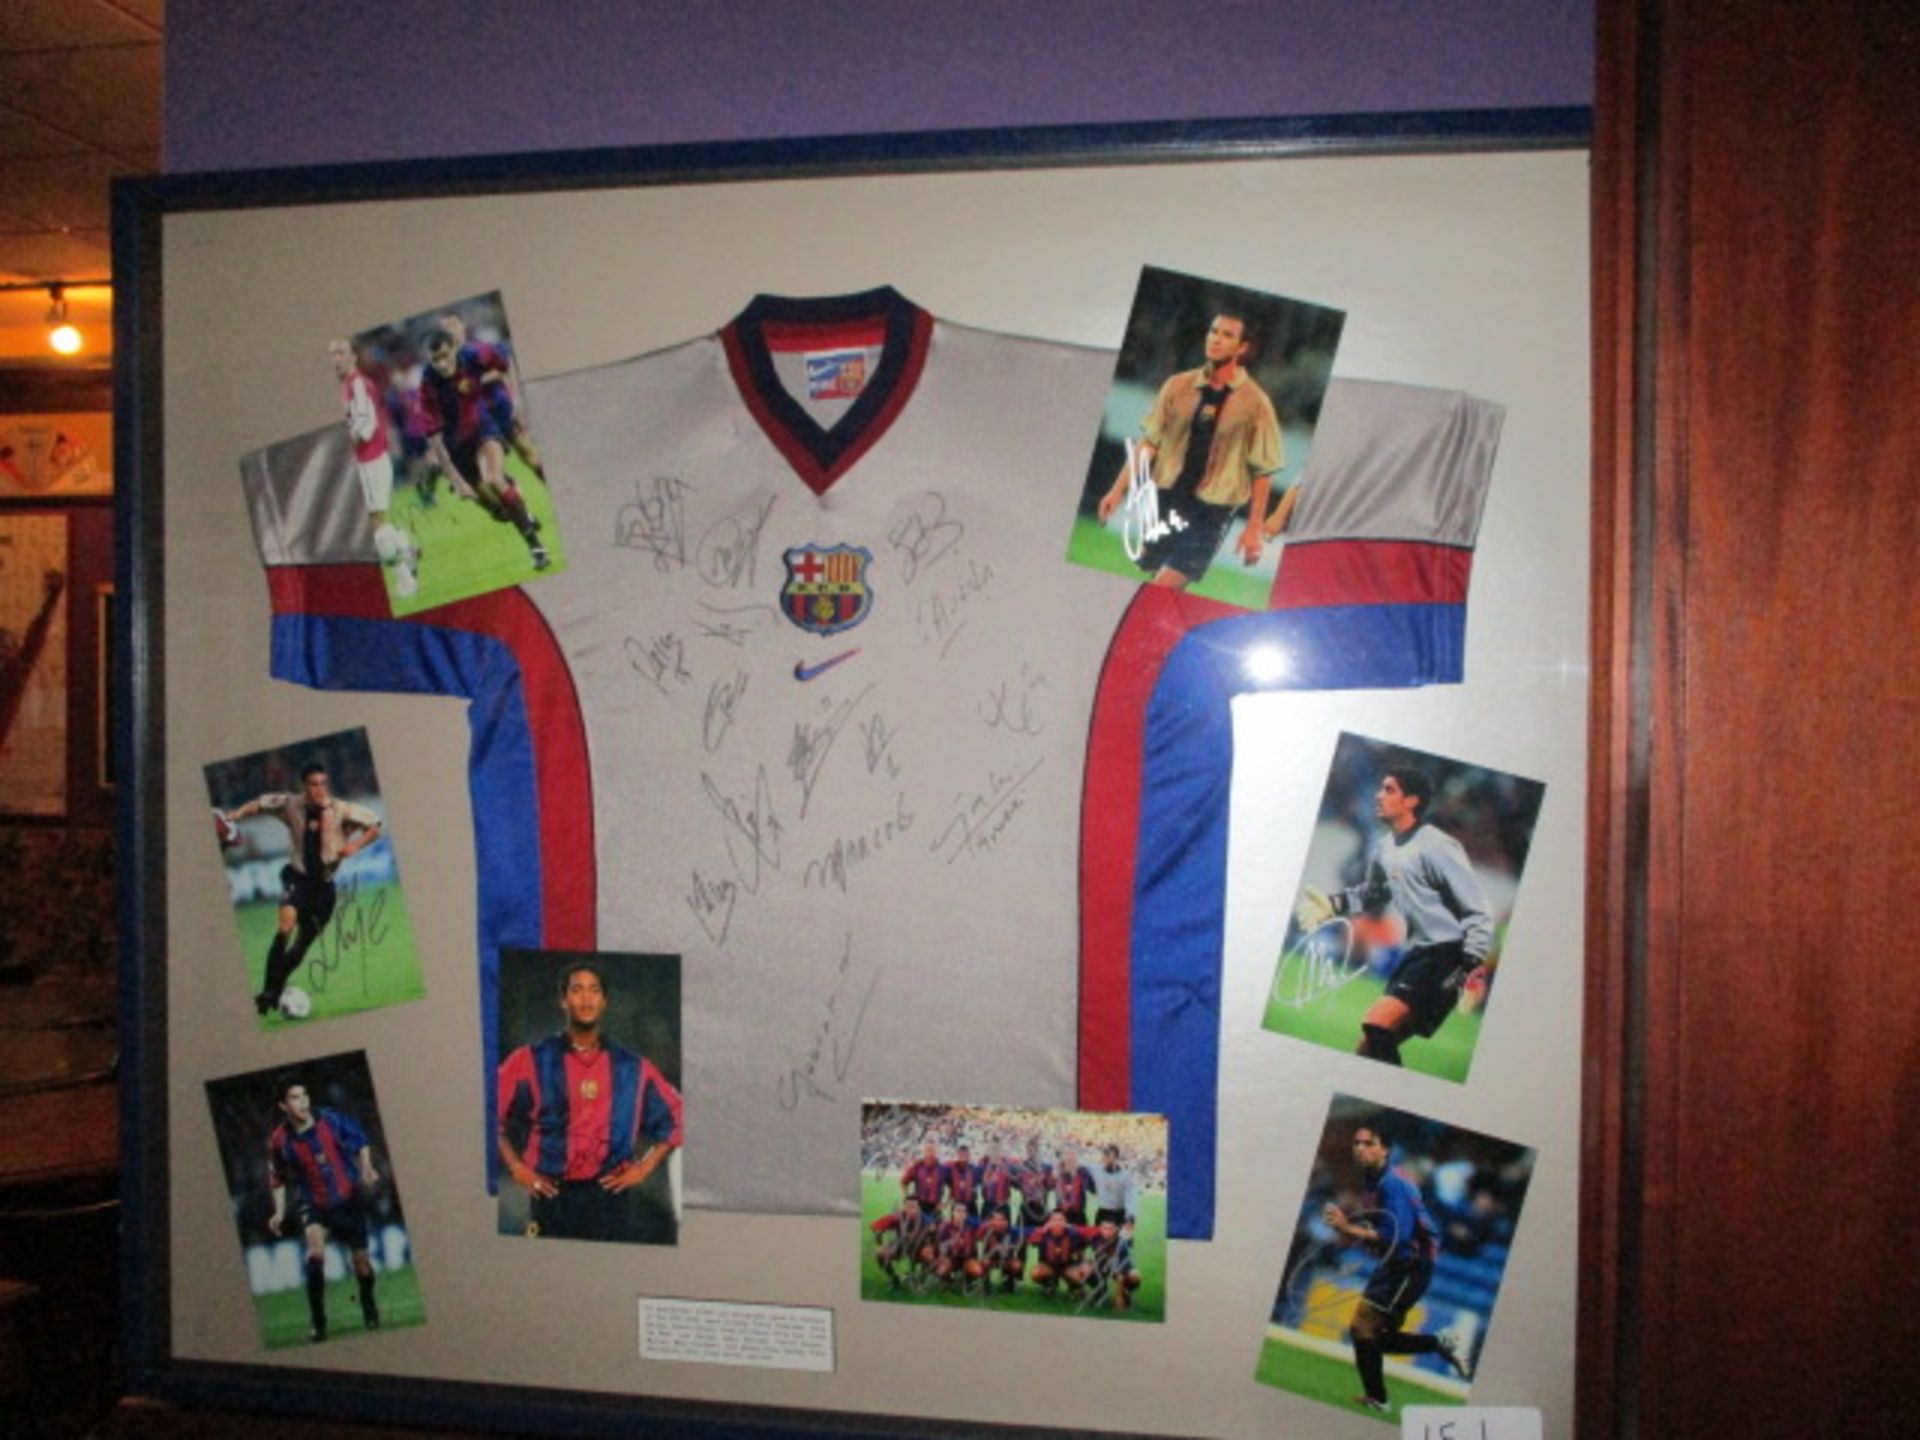 F.C. Barcelona signed jersey and individual photo, 48in w x 41in hgt - Image 2 of 3